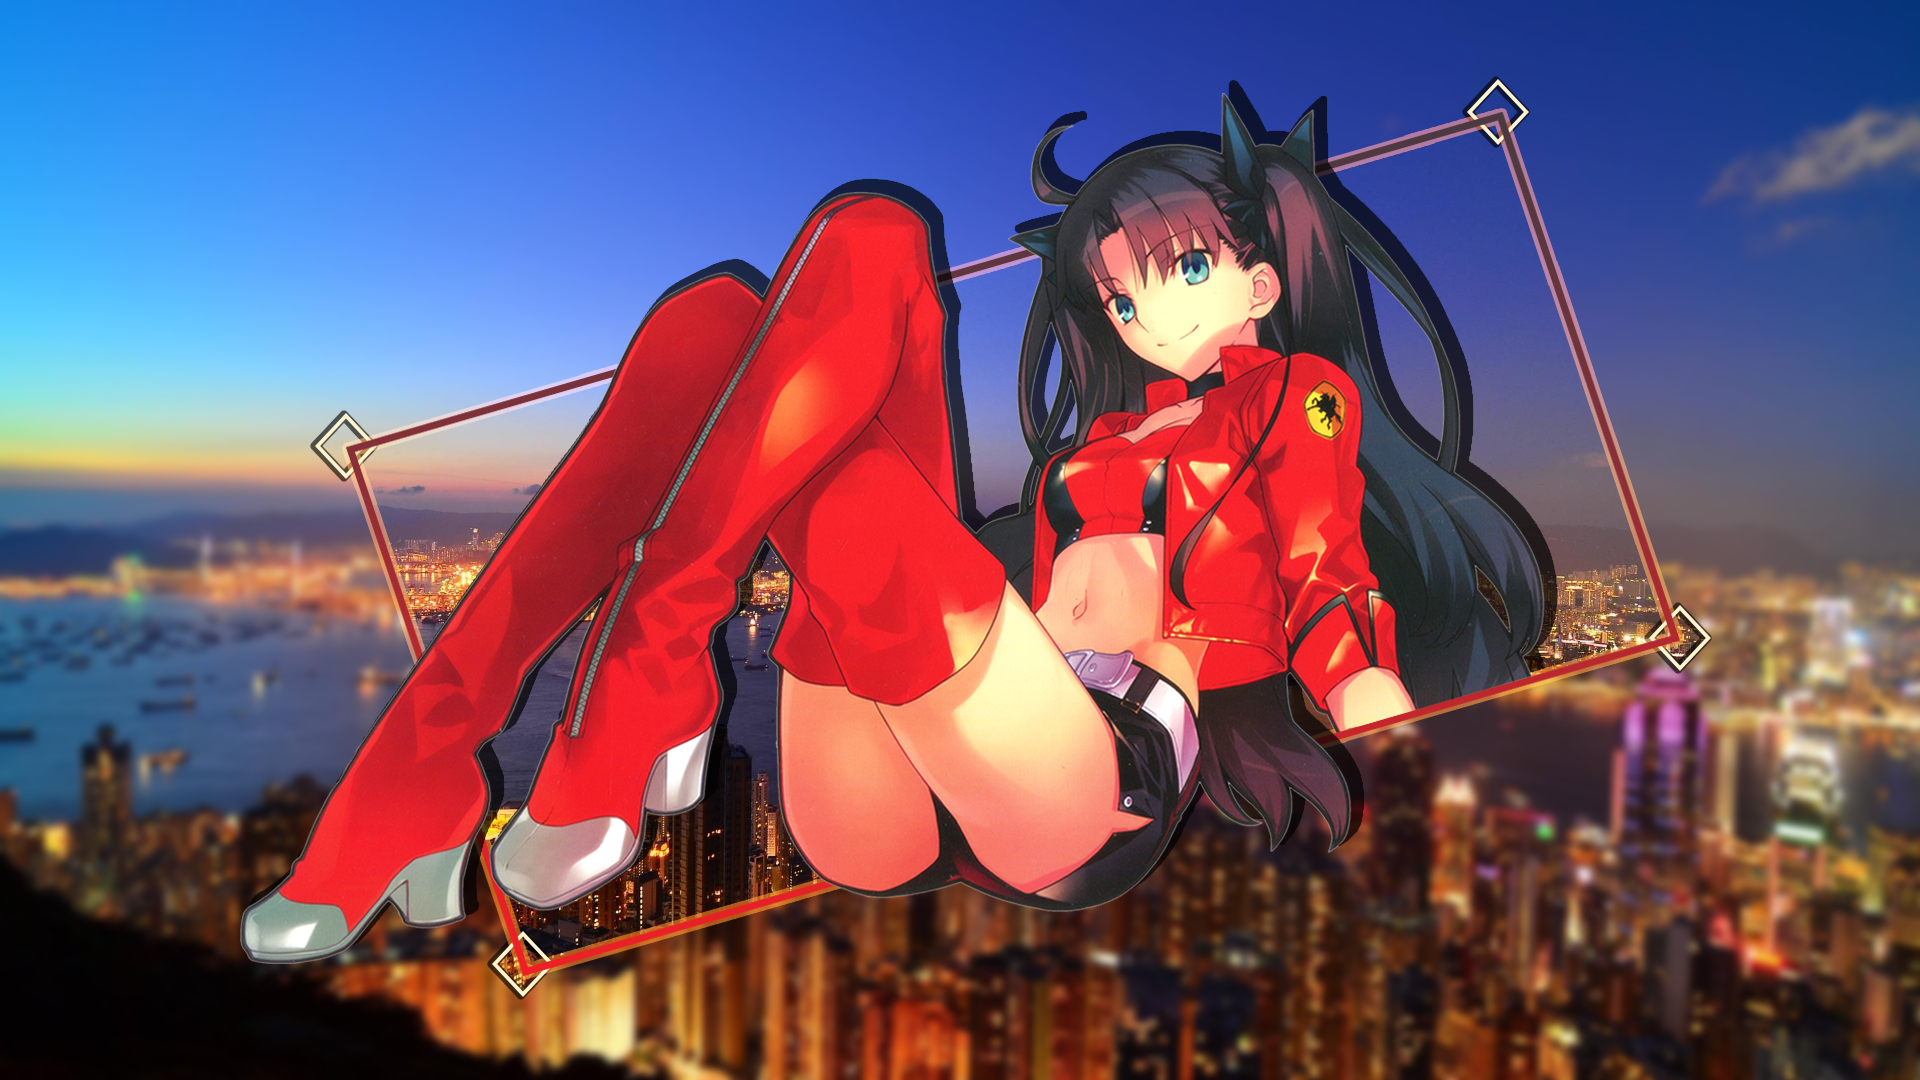 Anime 1920x1080 Tohsaka Rin Fate series Hong Kong picture-in-picture anime girls